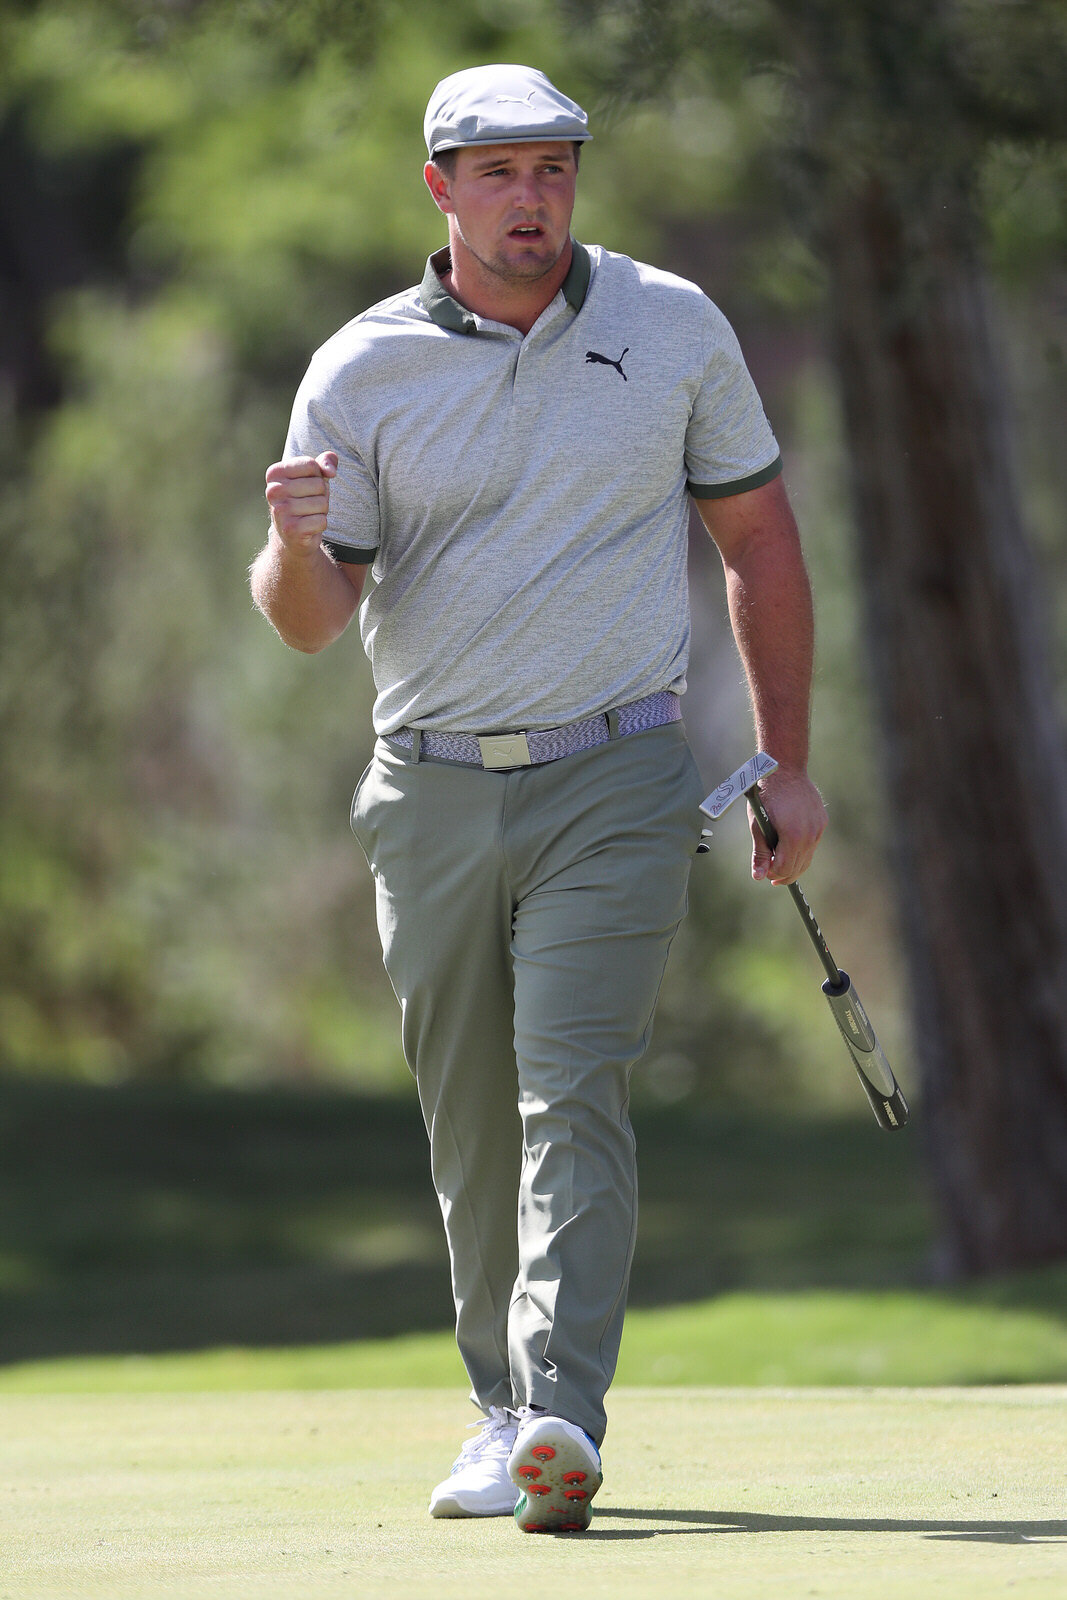  LAS VEGAS, NEVADA - OCTOBER 09: Bryson DeChambeau reacts to his putt on the 7th hole green during round two of the Shriners Hospitals For Children Open at TPC Summerlin on October 09, 2020 in Las Vegas, Nevada. (Photo by Matthew Stockman/Getty Image